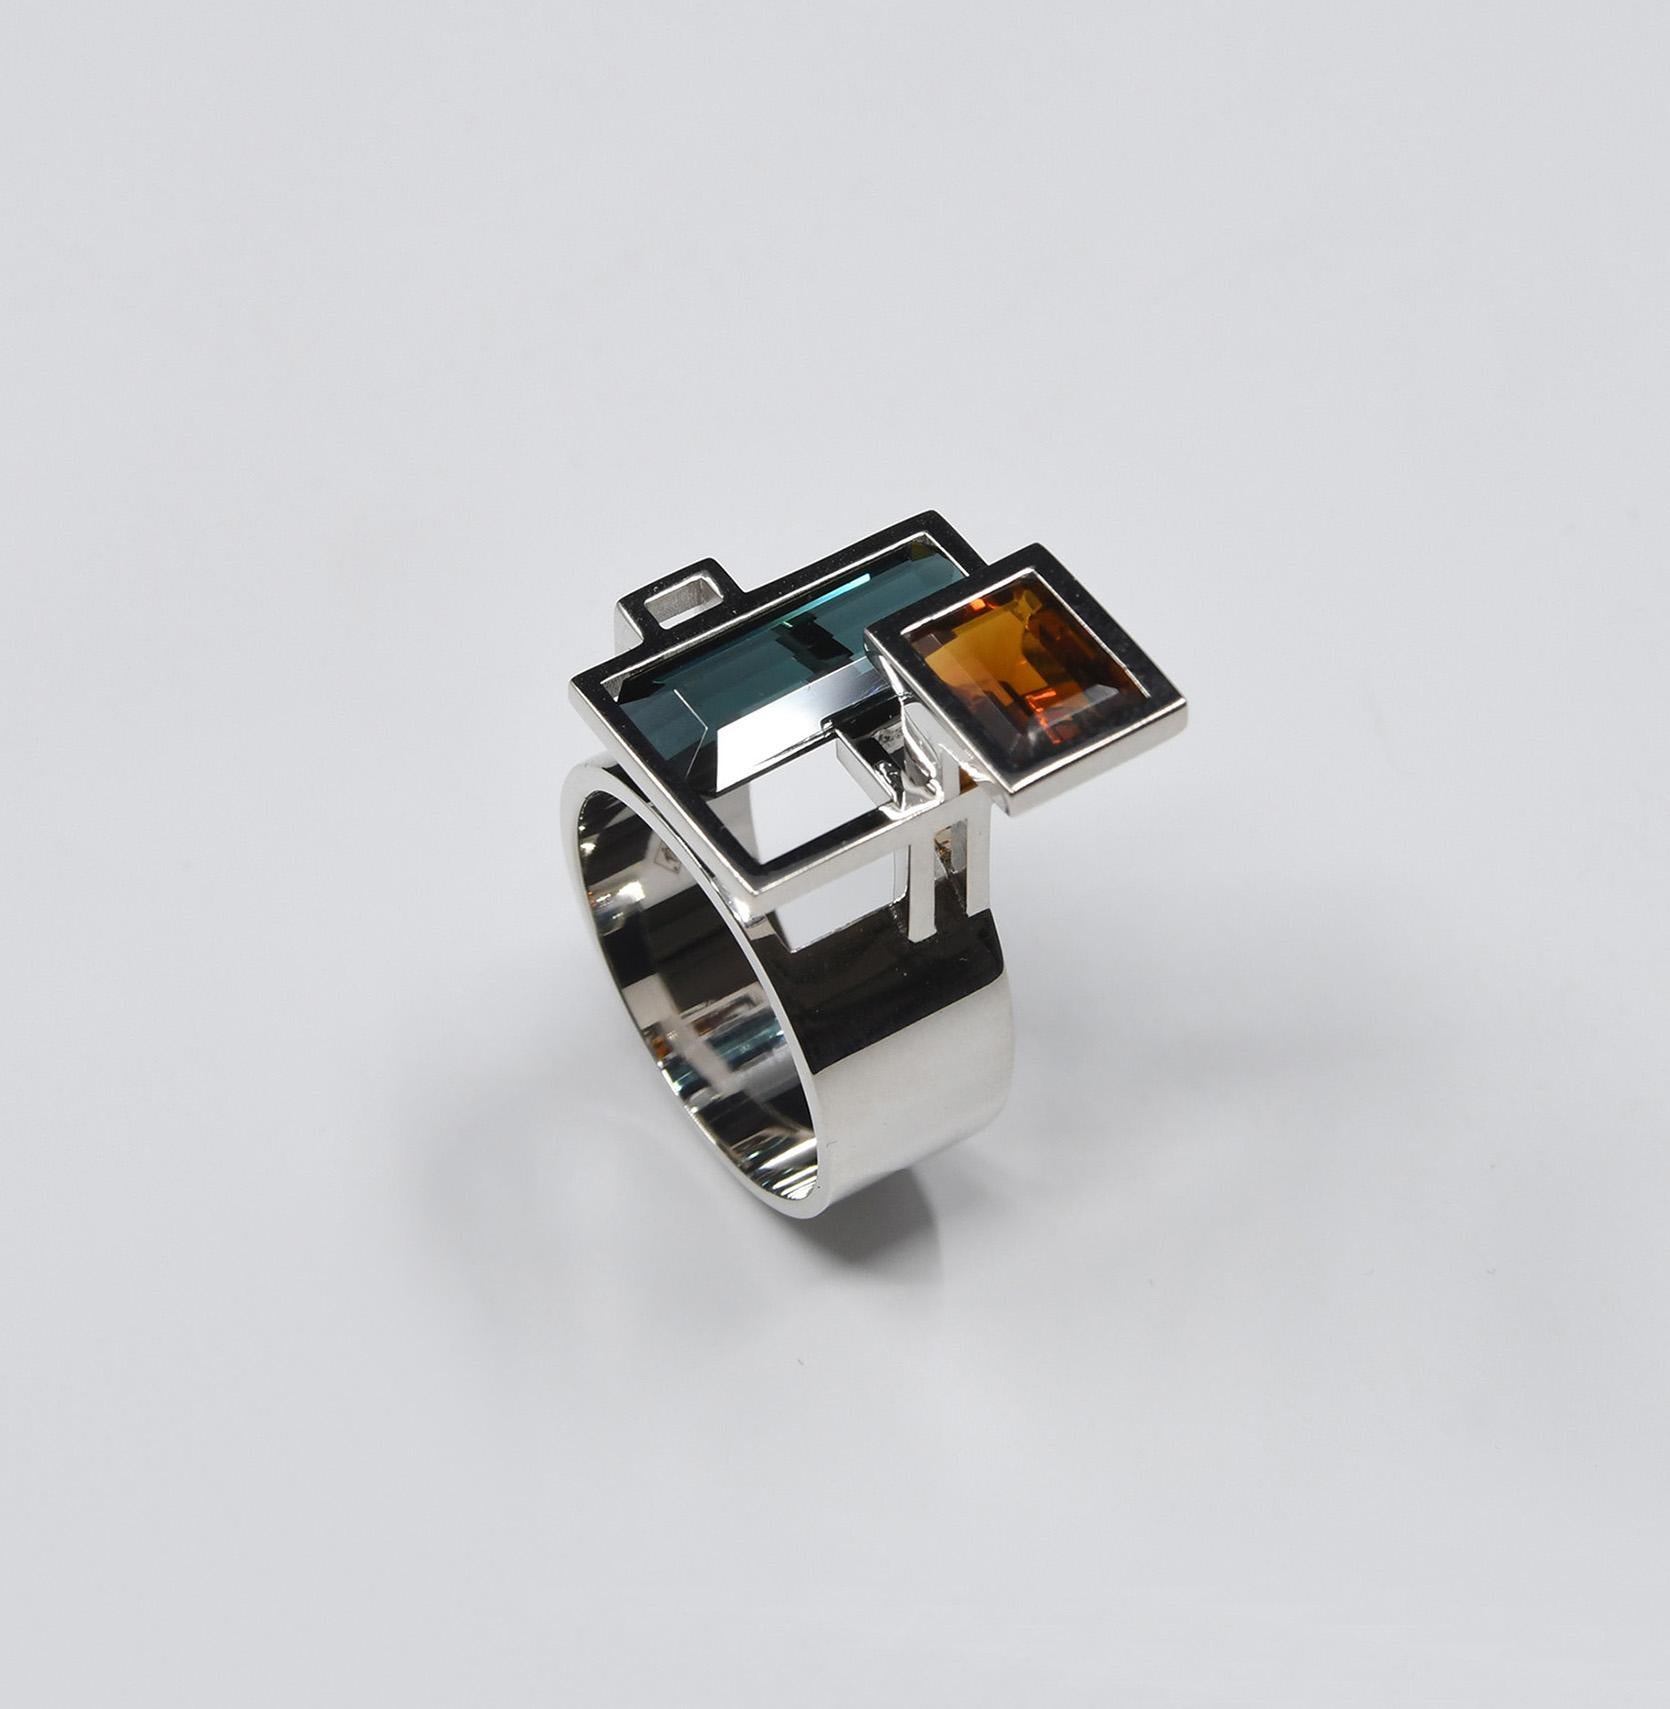 Women's or Men's Equation Ring with 1.72 ct Spessartite Garnet, 3.66 ct Indicolite Tourmaline For Sale